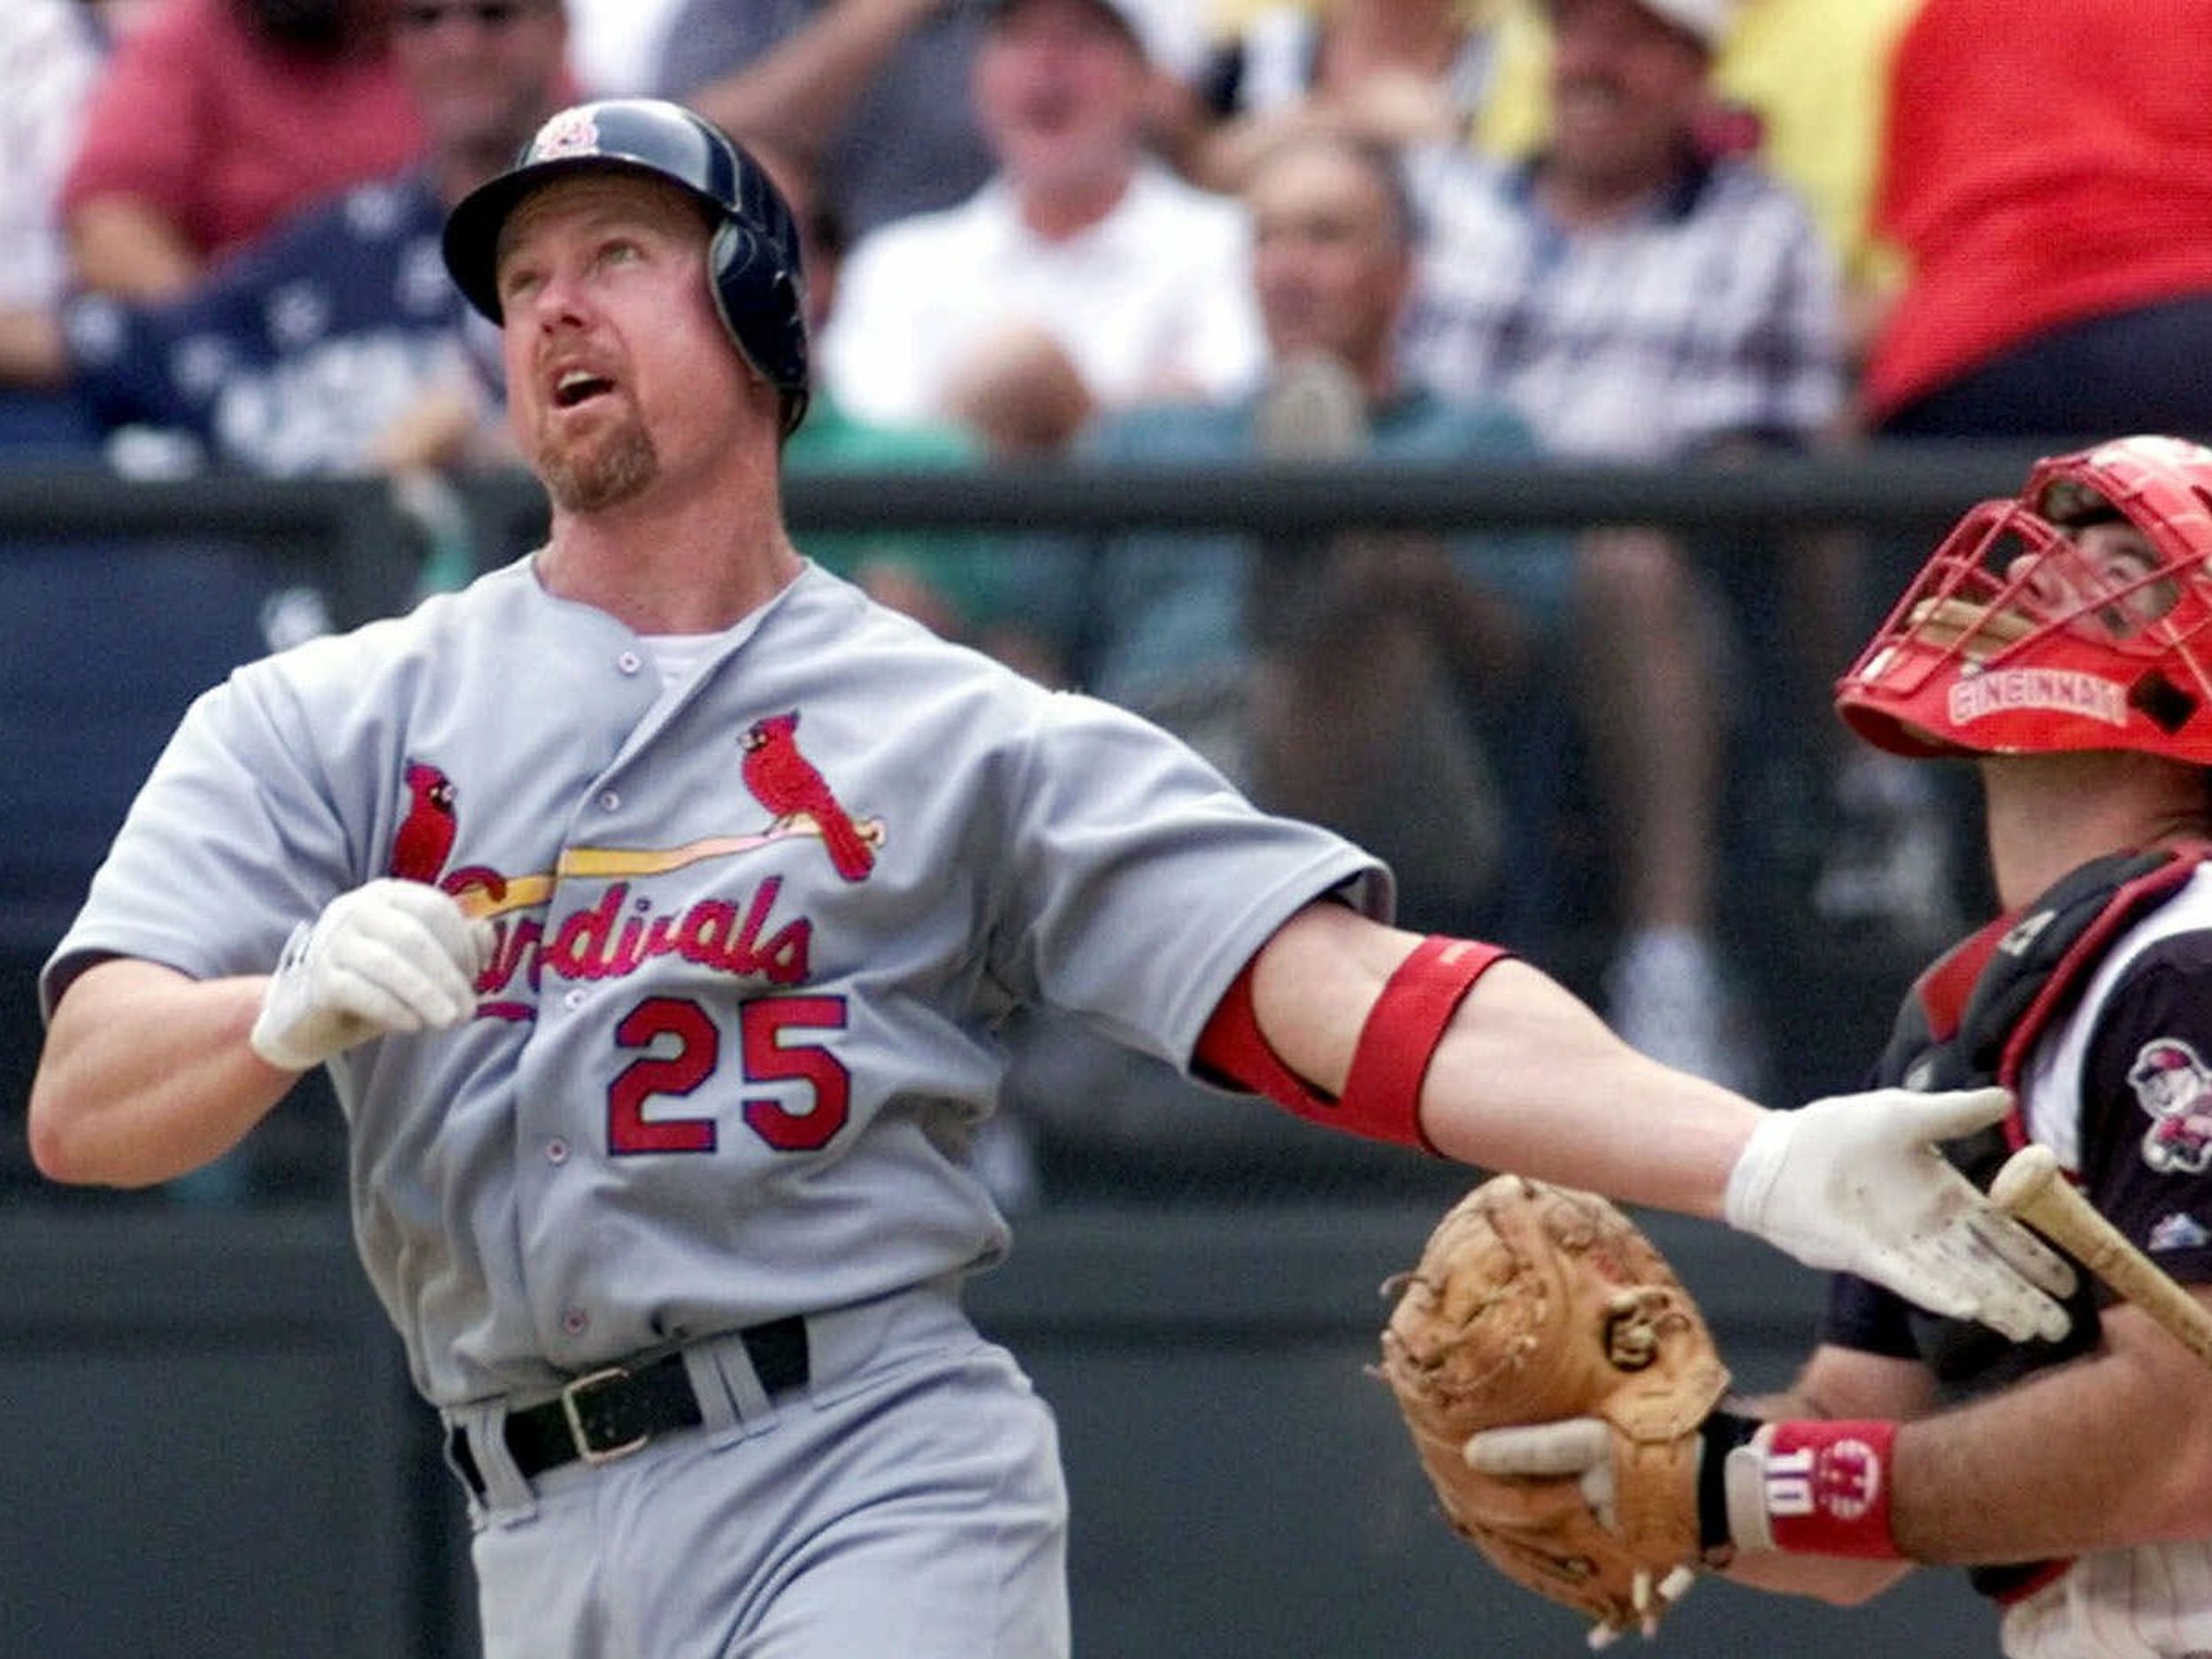 McGwire admits he used steroids